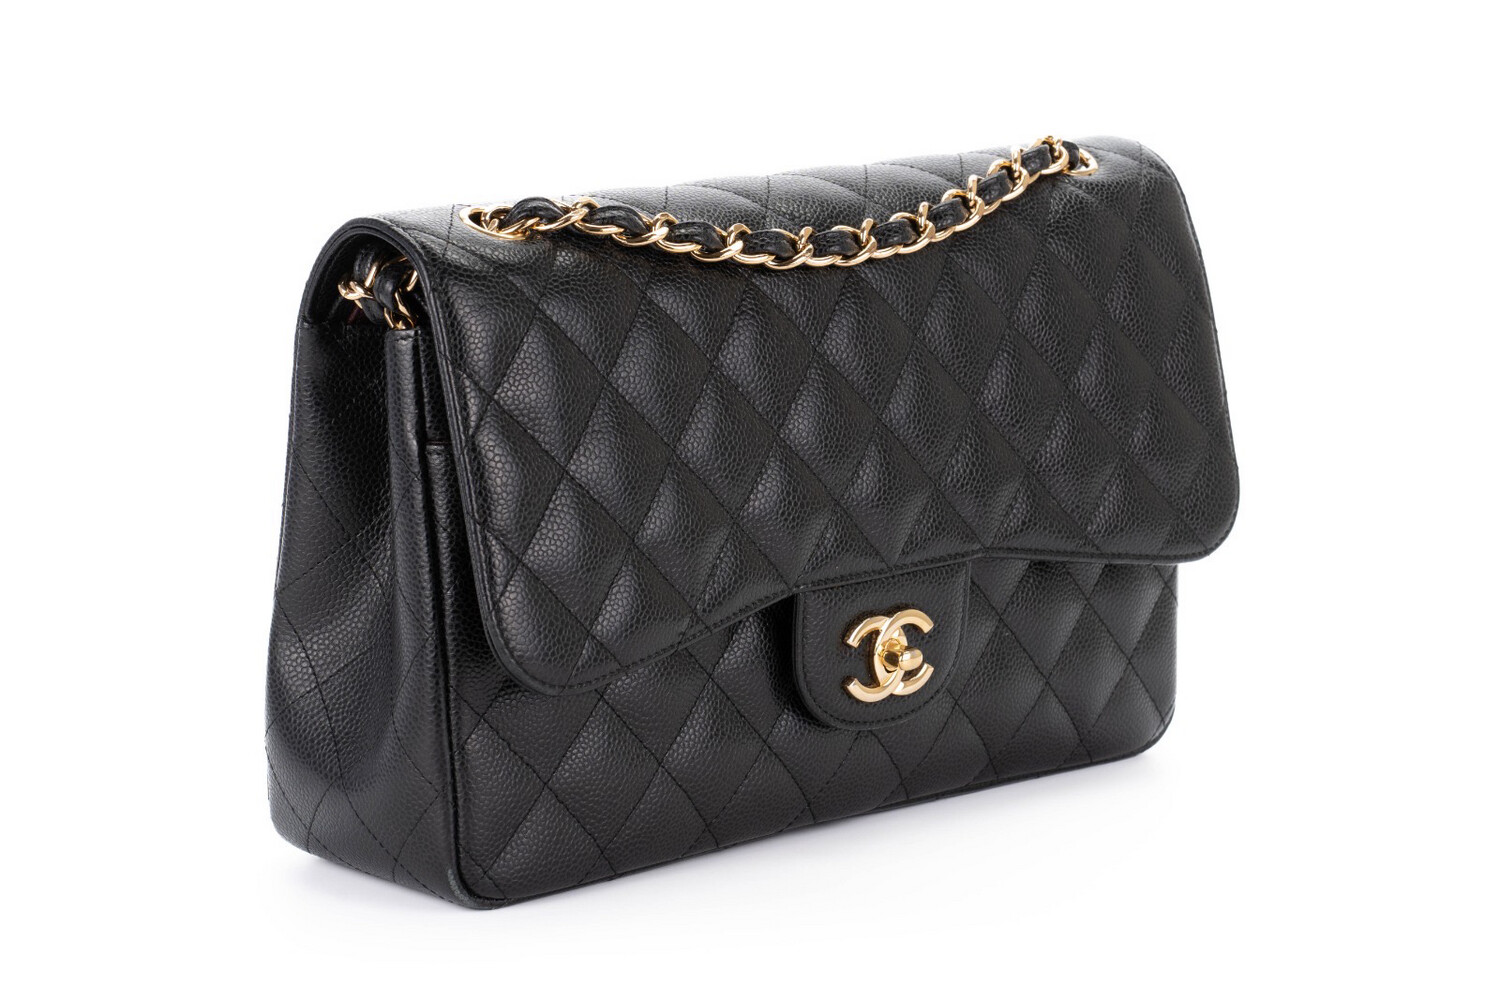 Chanel Classic Jumbo Double Flap, Black Caviar Leather, Gold Hardware, Preowned - No Dustbag (Ships From London)